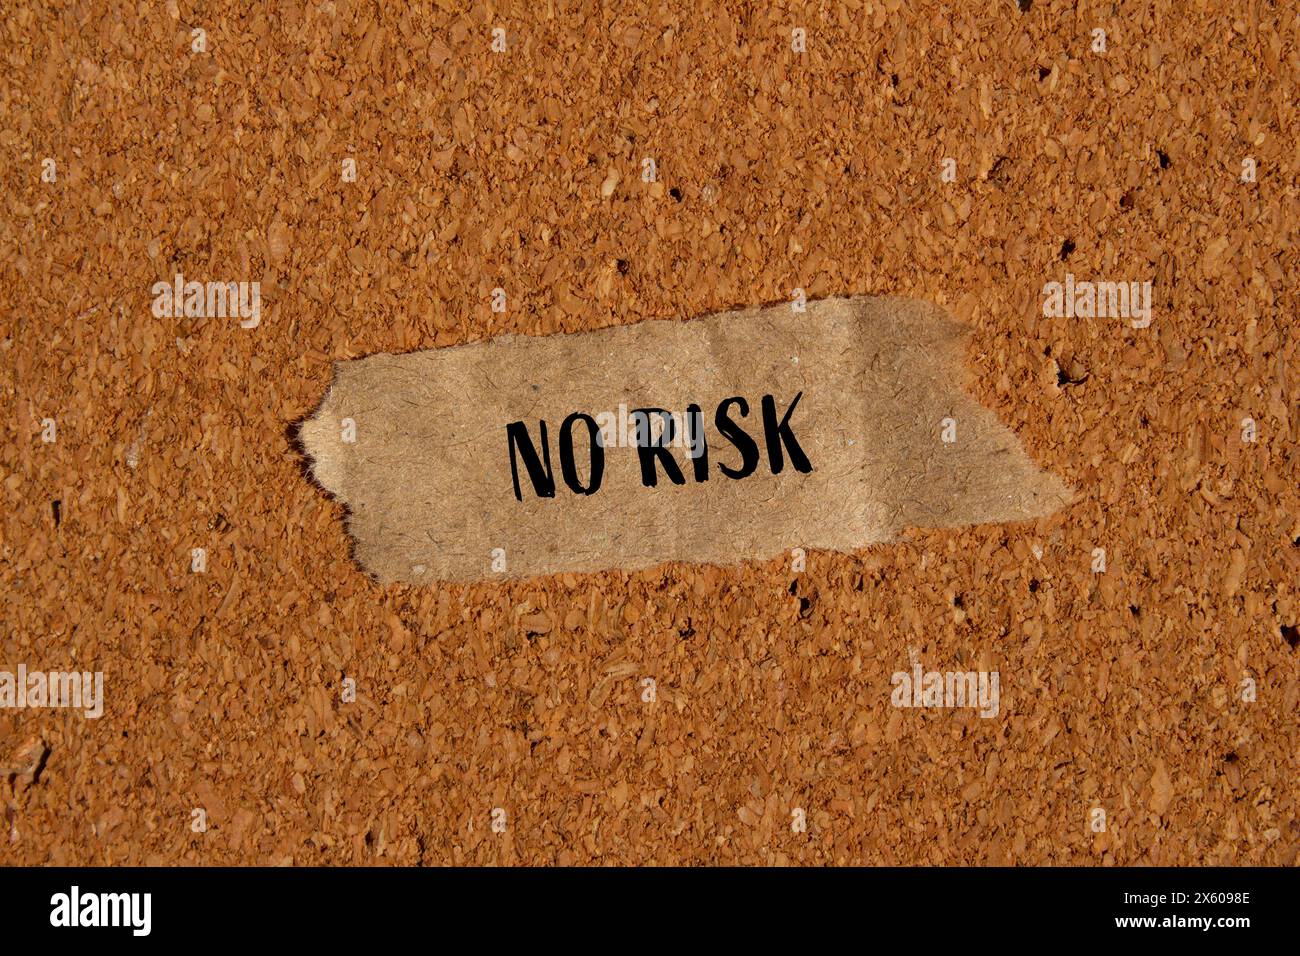 No risk words written on ripped paper piece with brown background. Conceptual no risk symbol. Copy space. Stock Photo